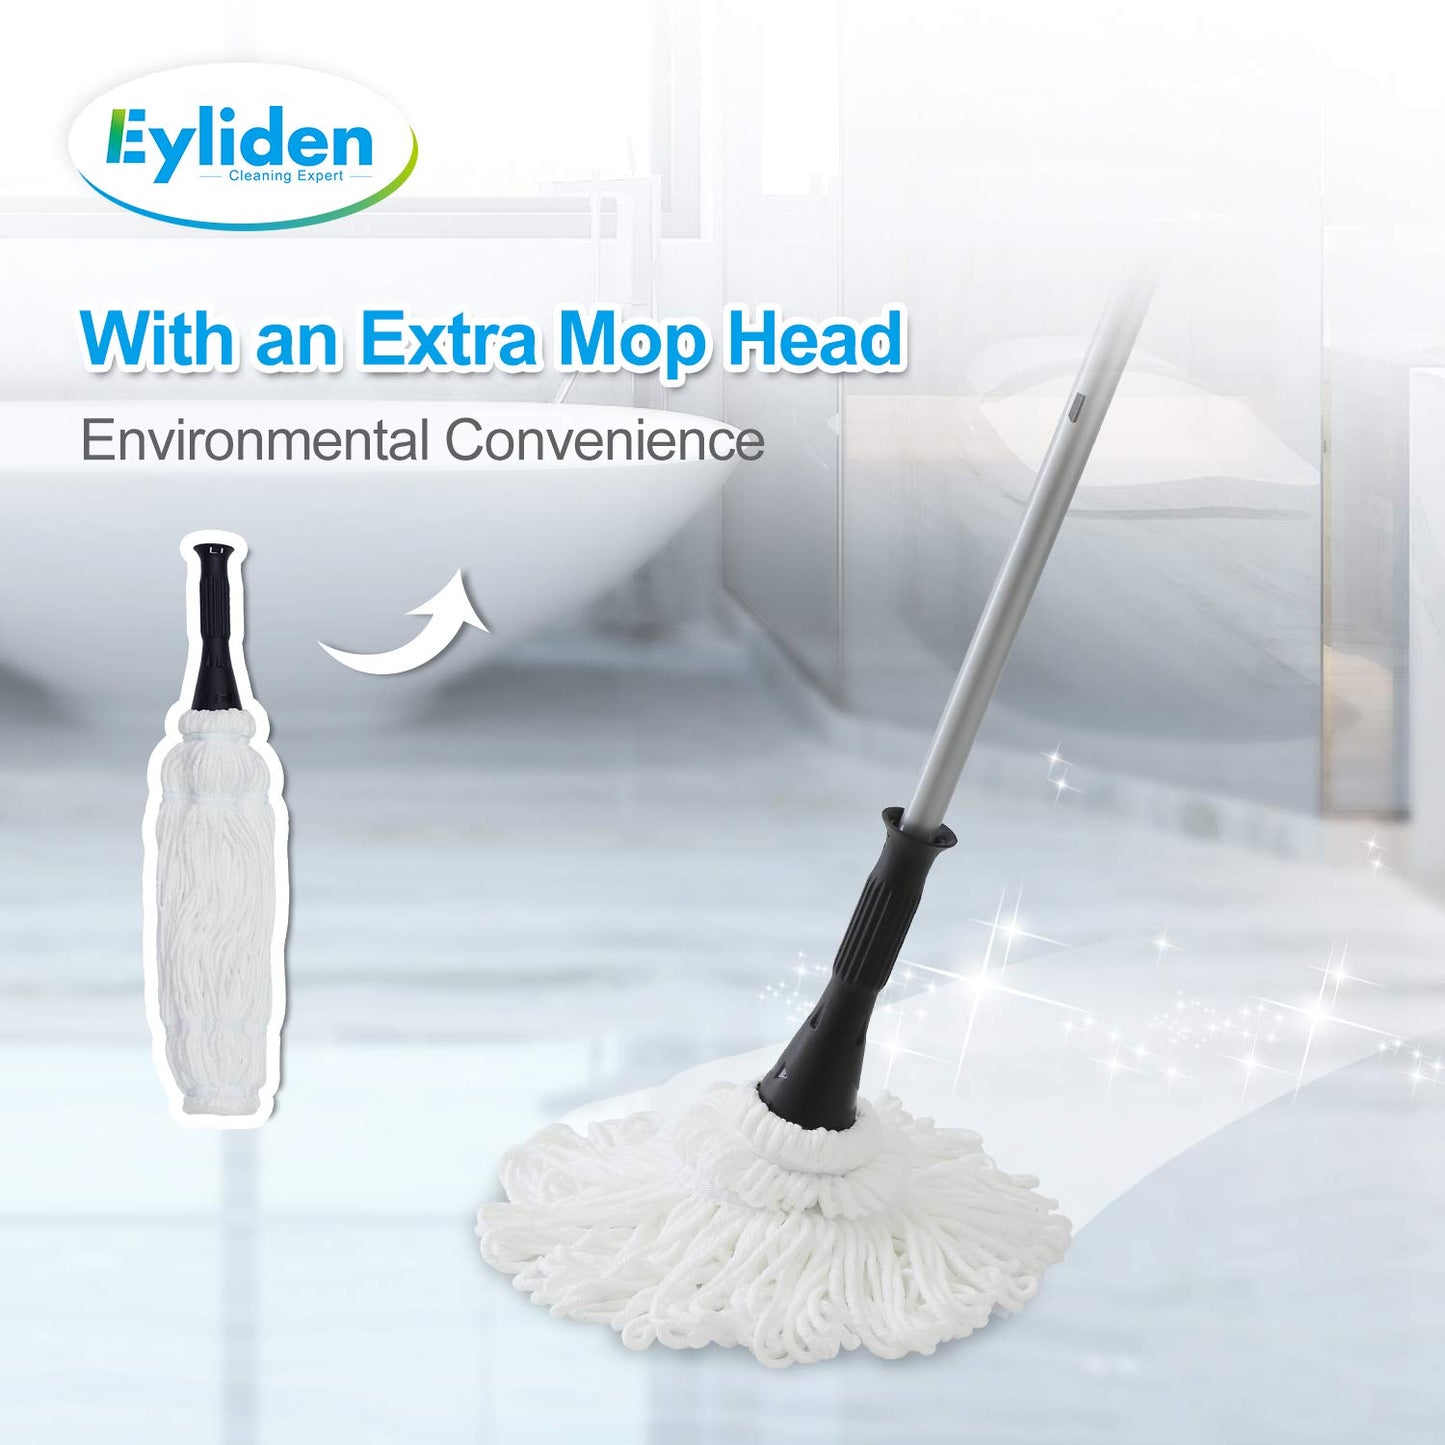 Commercial Wet Mops: How to Use a Mop & The Best Way to Clean a